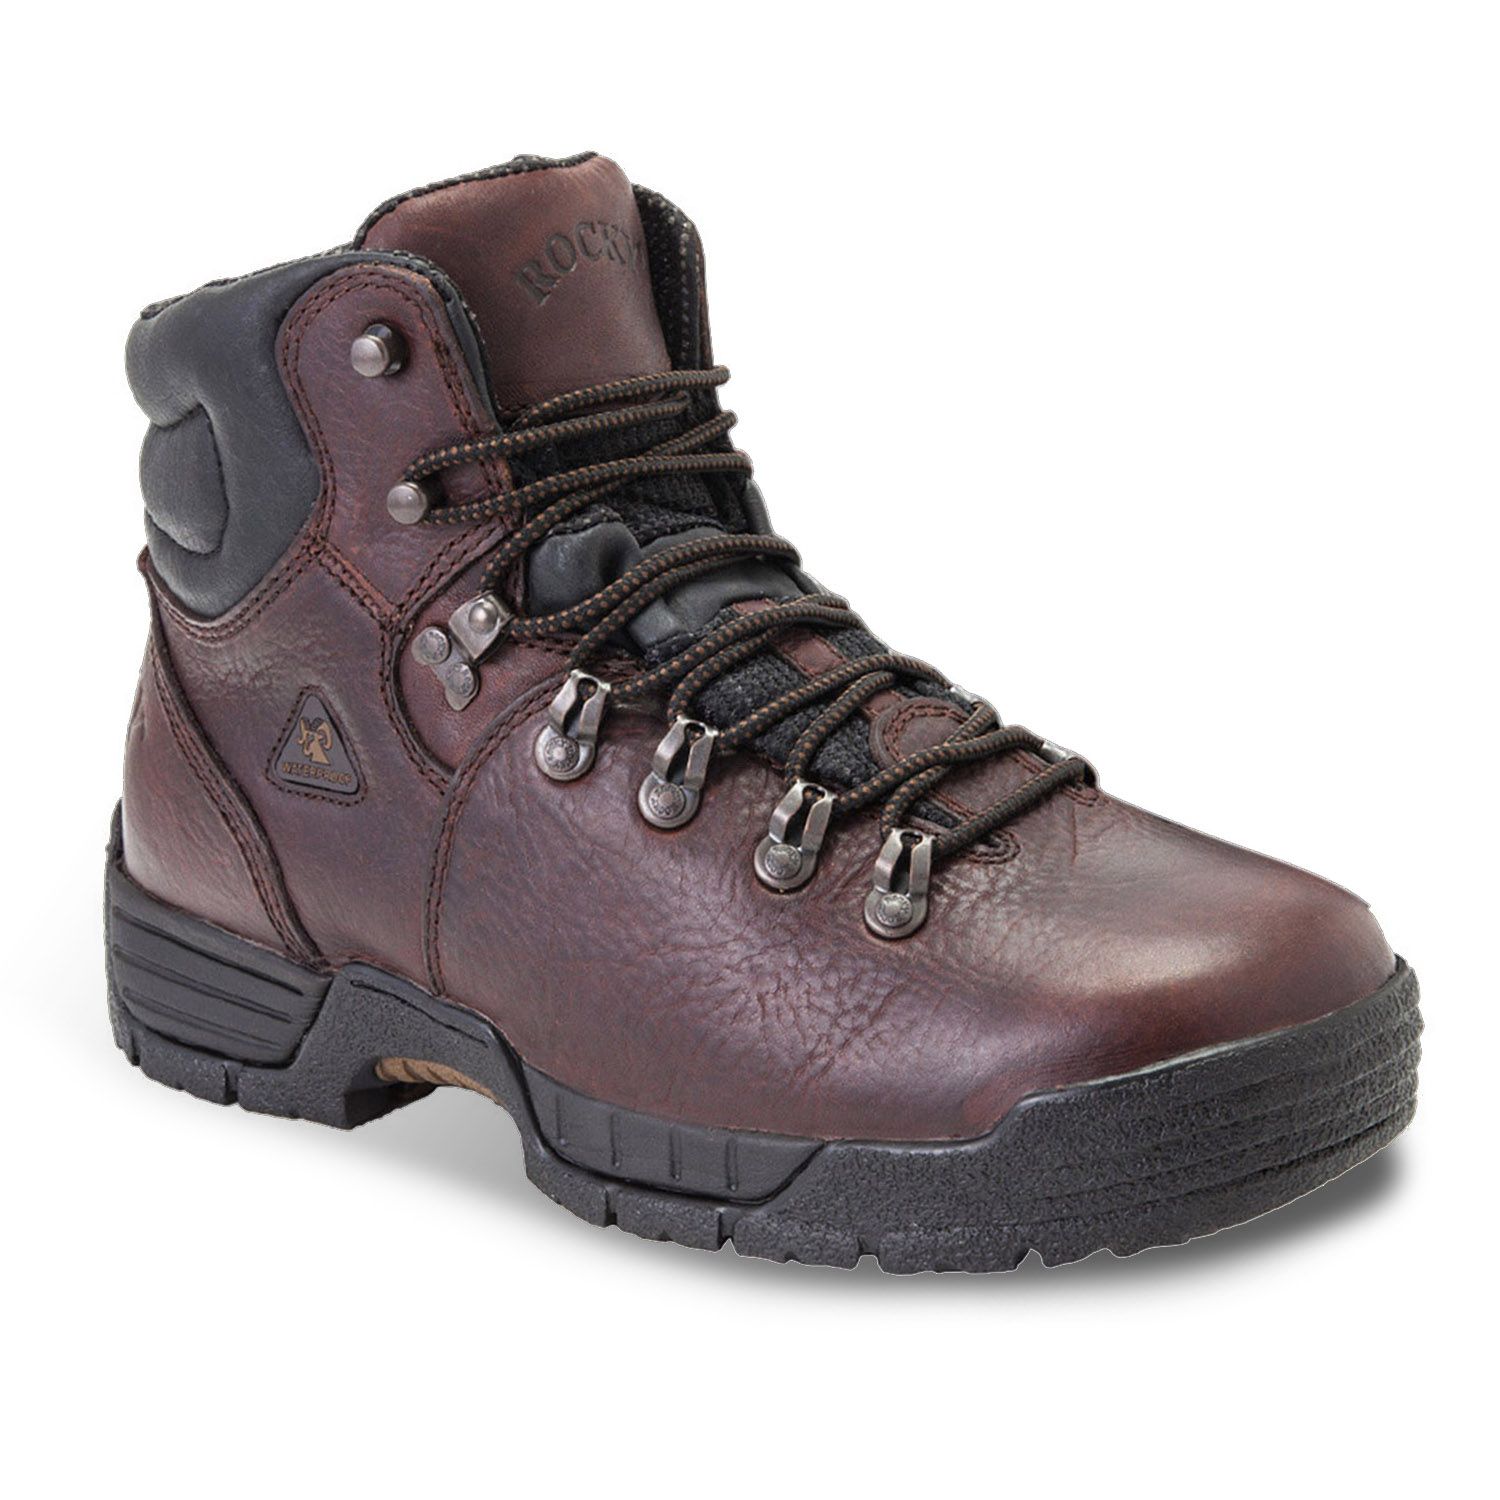 where to buy steel toe boots near me